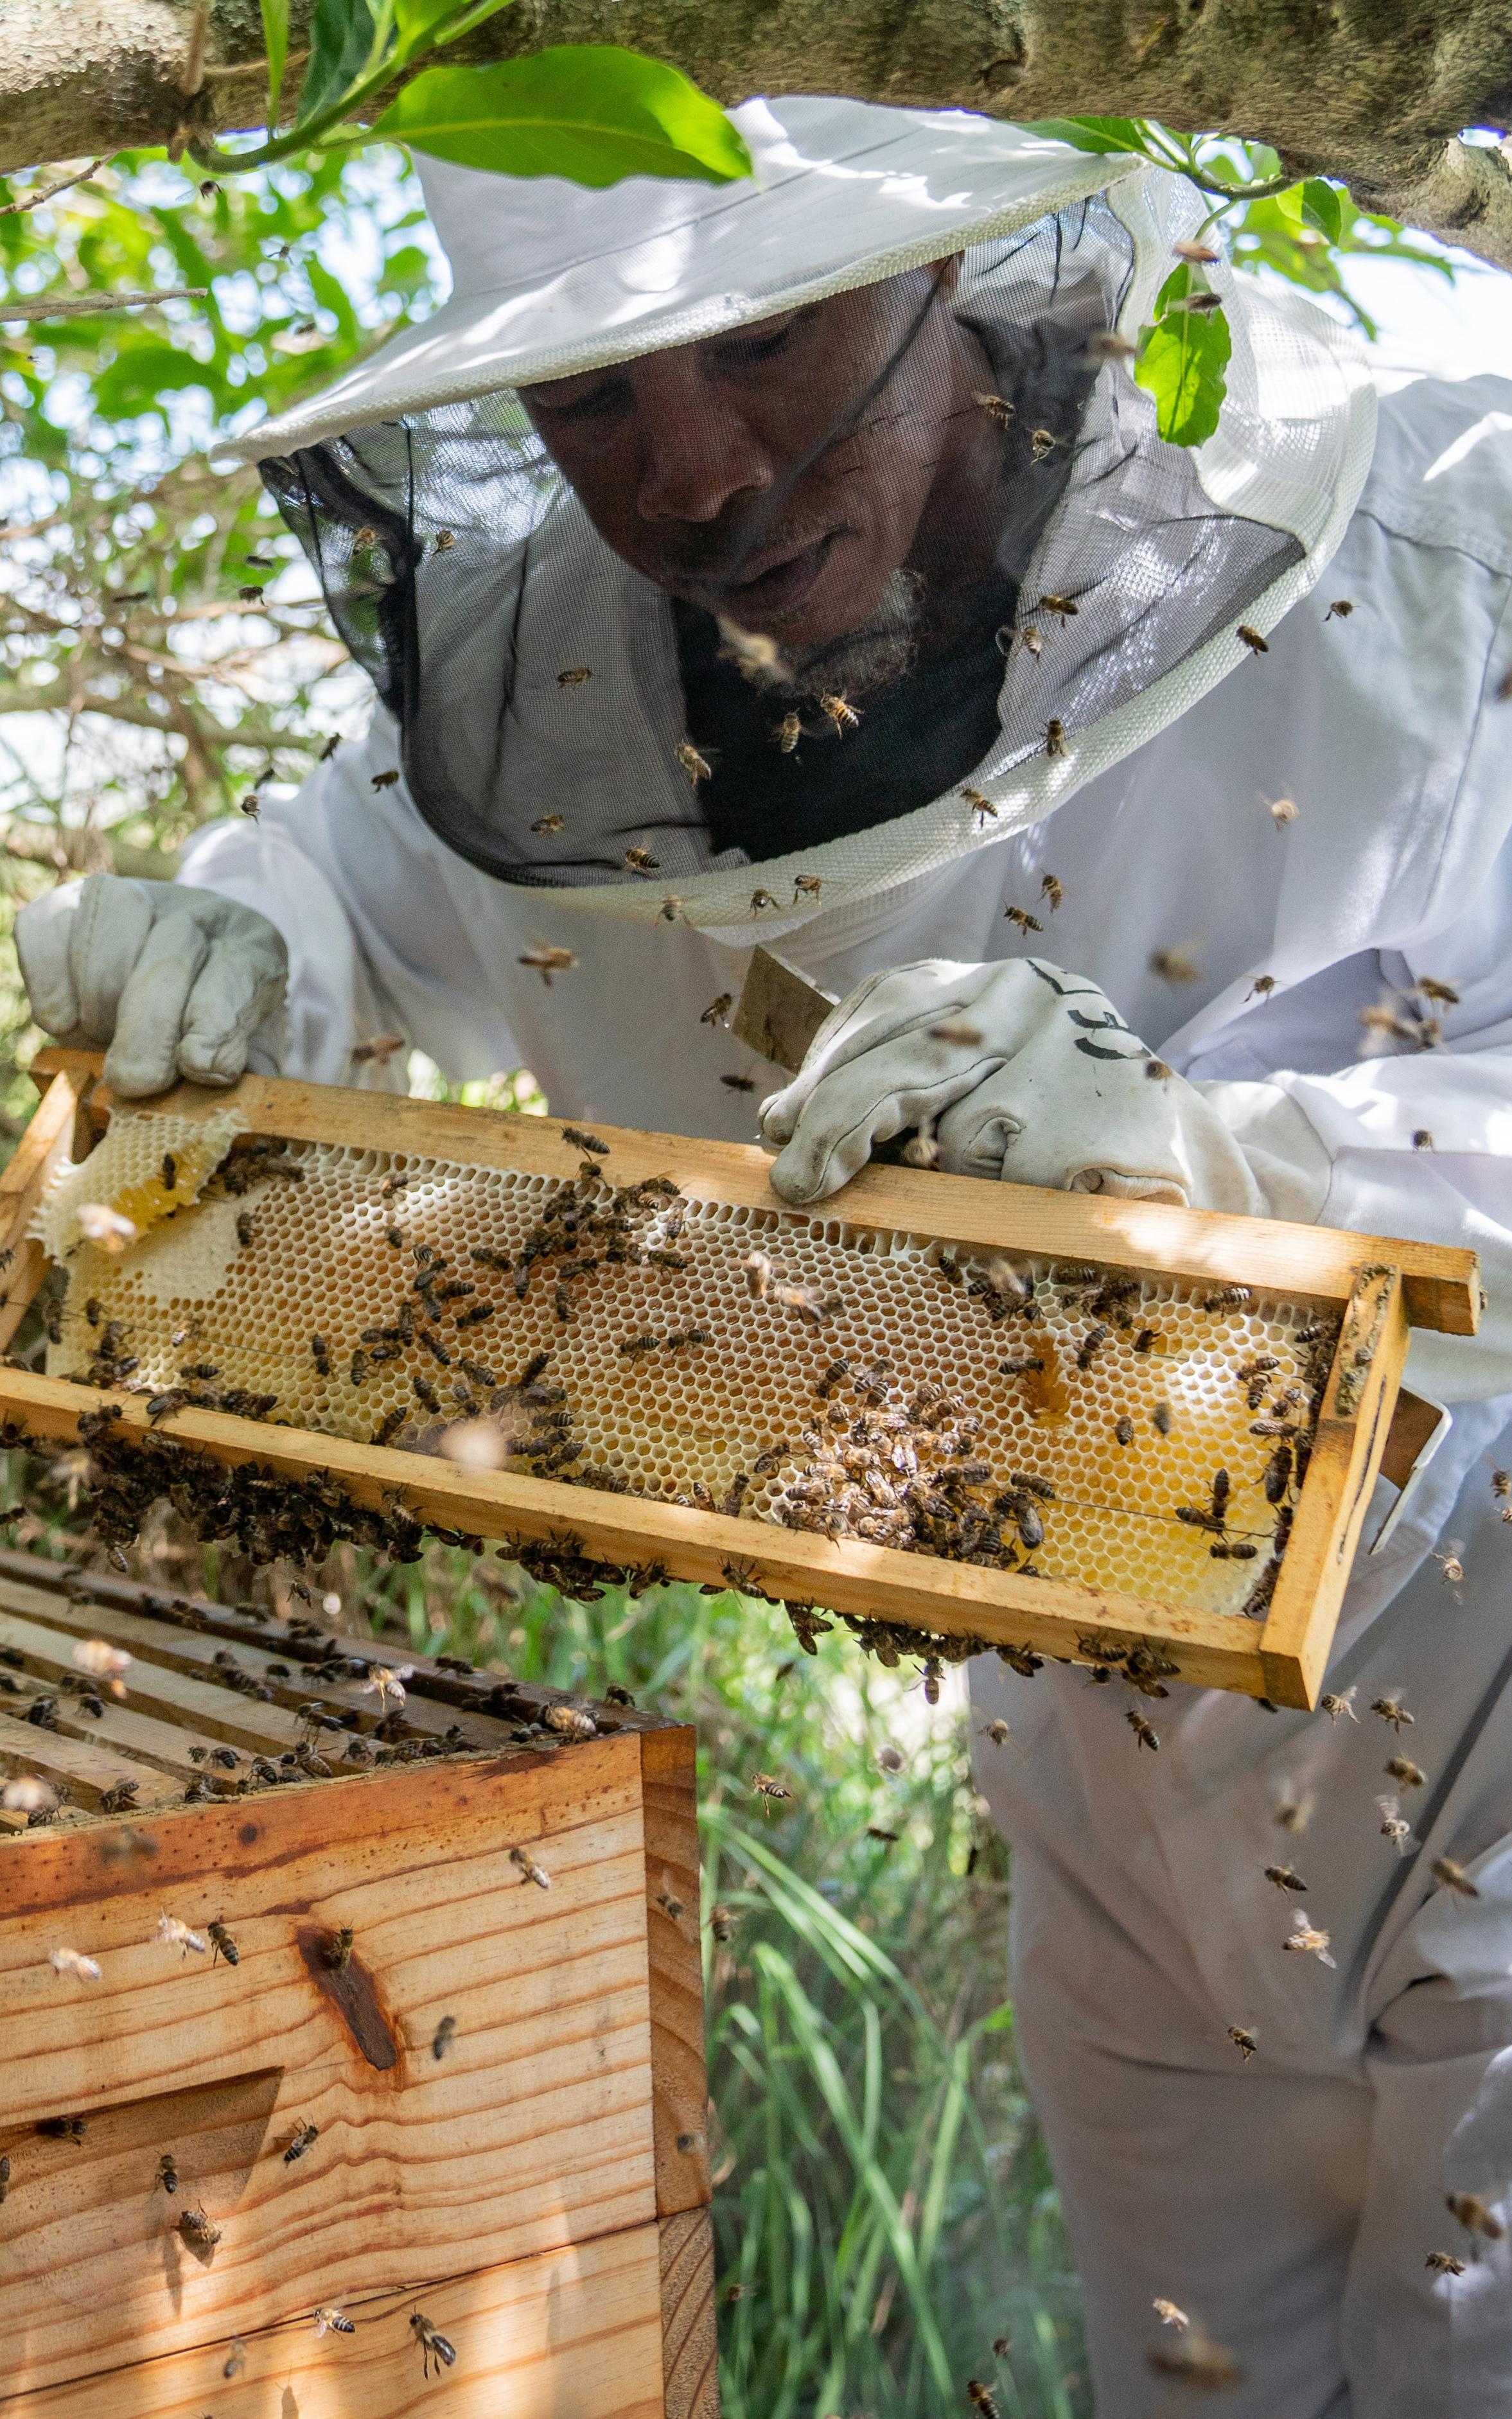 Musician turns to beekeeping to heal